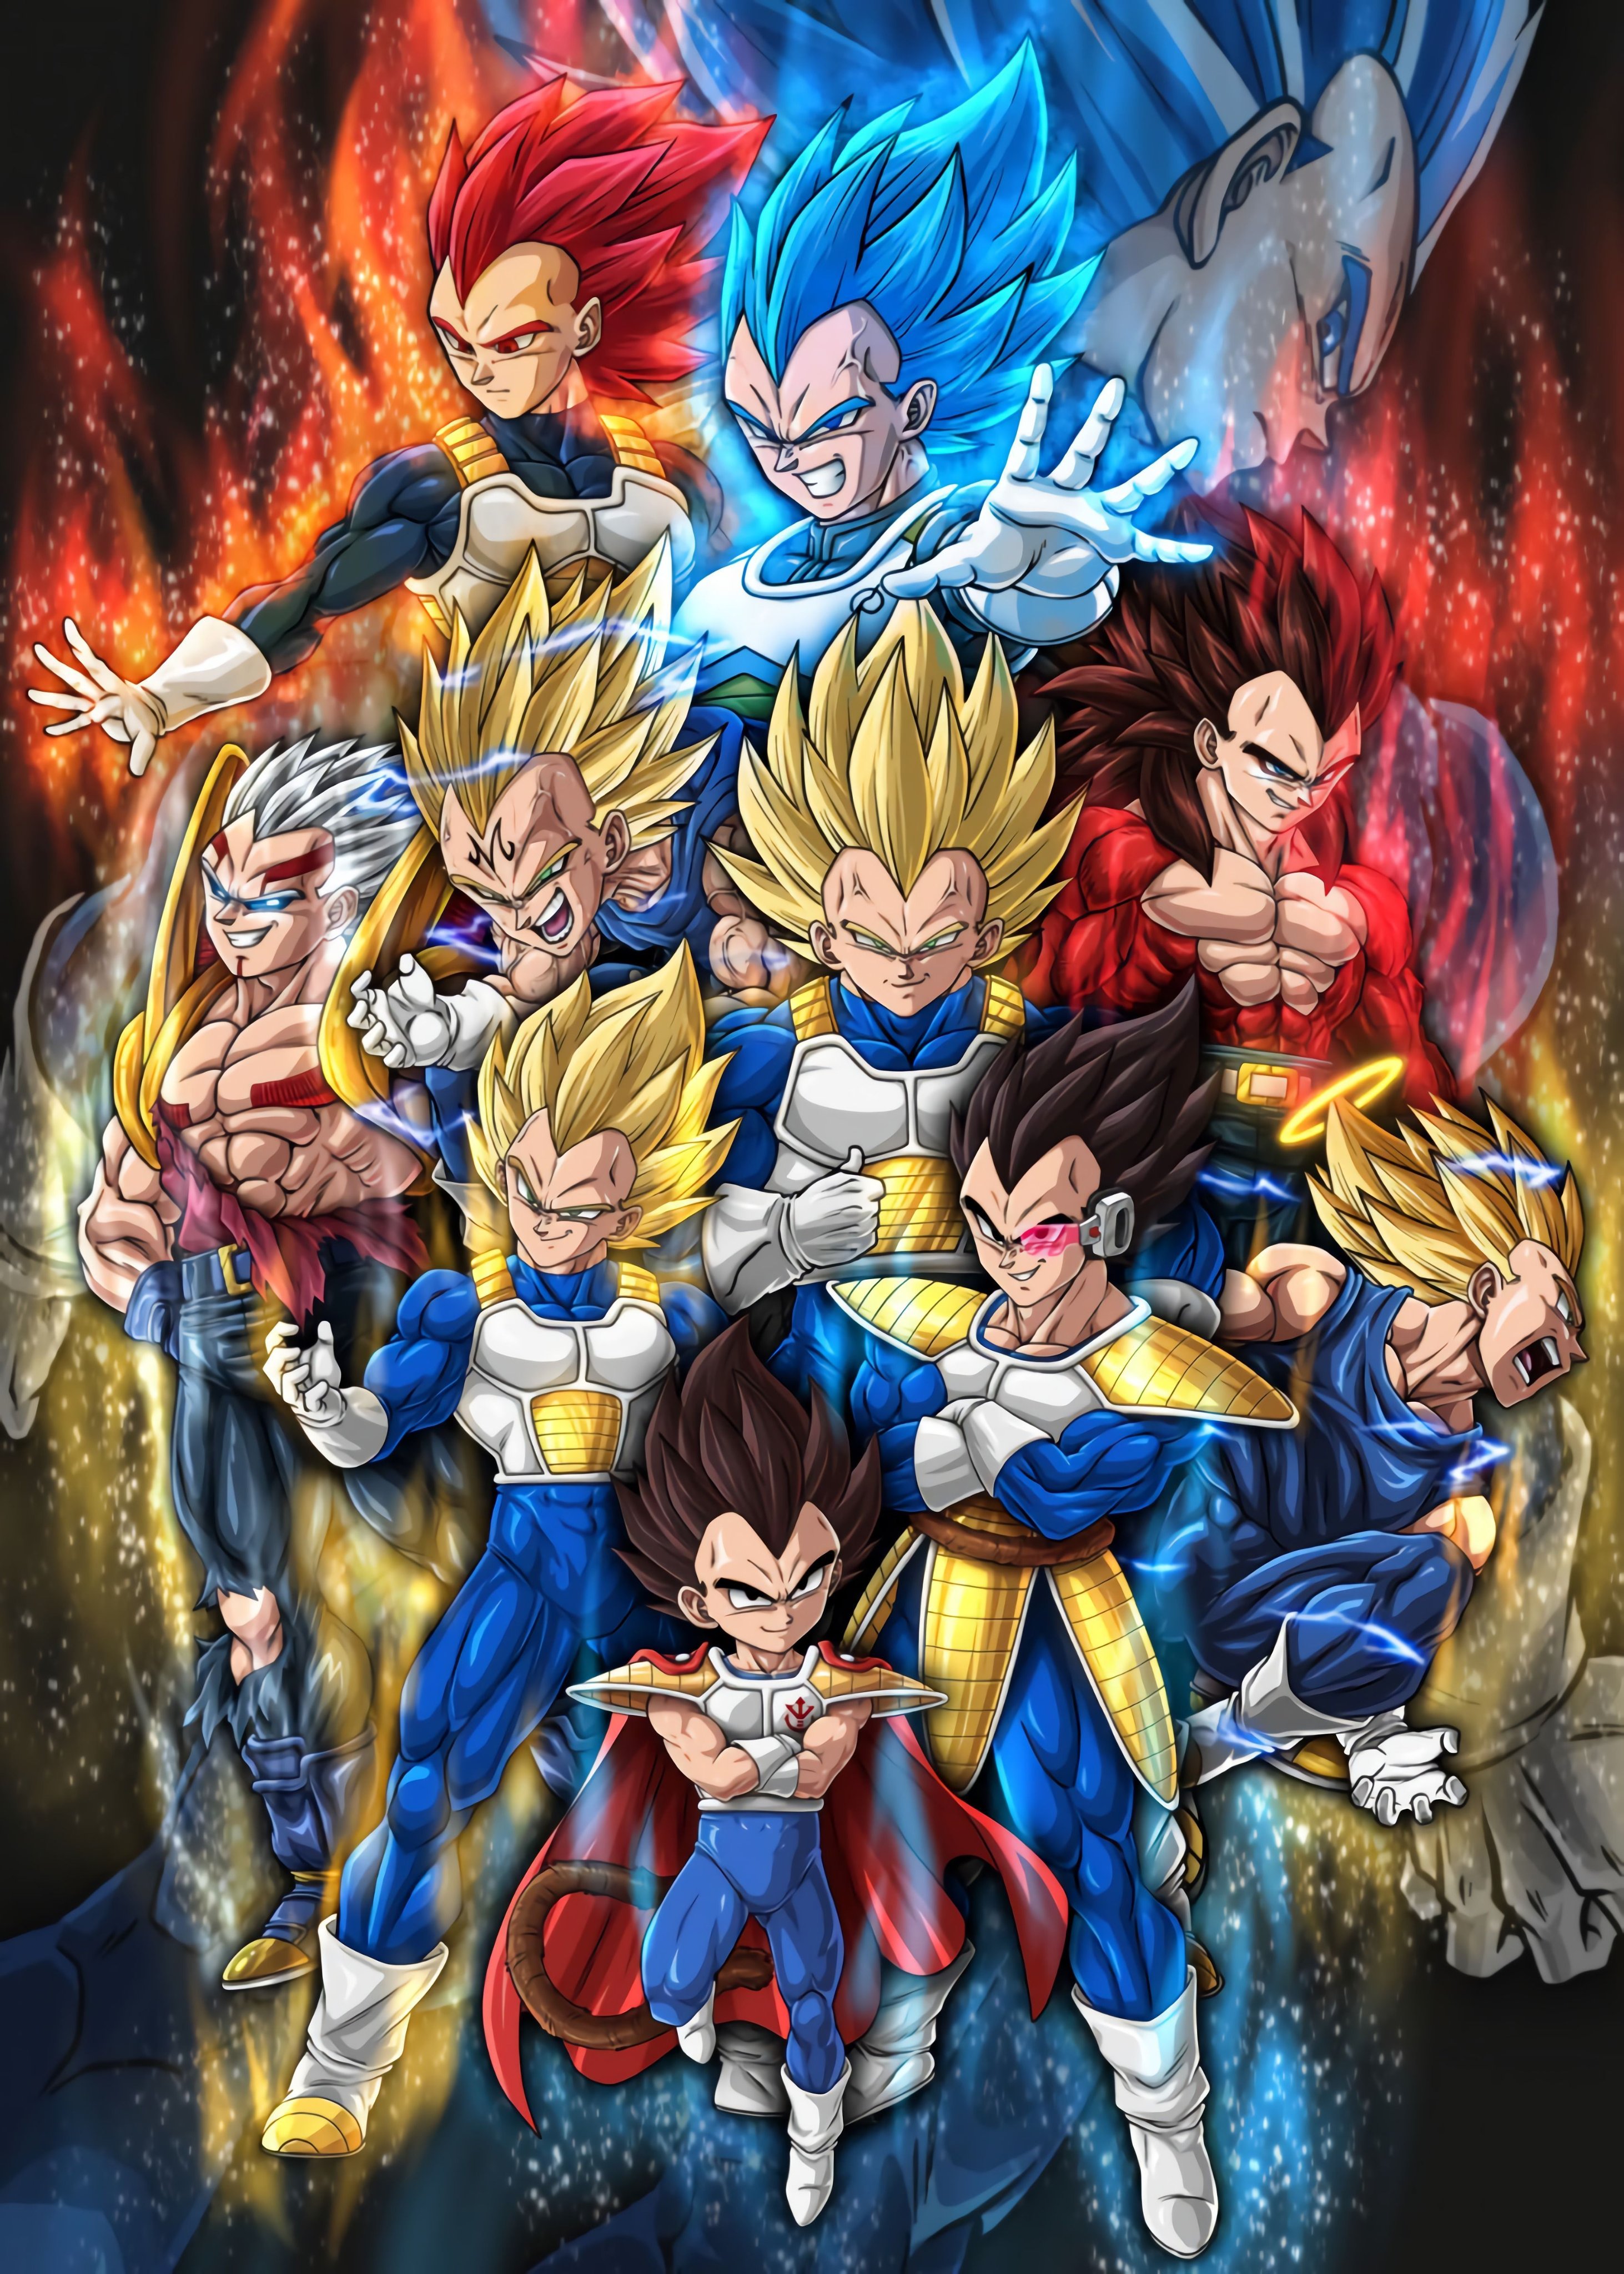 Anime Stuffs on Twitter: "Vegeta all forms. Here's the link:-  https://t.co/K3Ky7pbKQa https://t.co/gYdFqnROLg https://t.co/zLtpr65BFD  Just check this out. #dragonball #dragonballz #DragonBallSuper #DBZ  #supersaiyandragonballgt #songoku #ultrainstinct ...